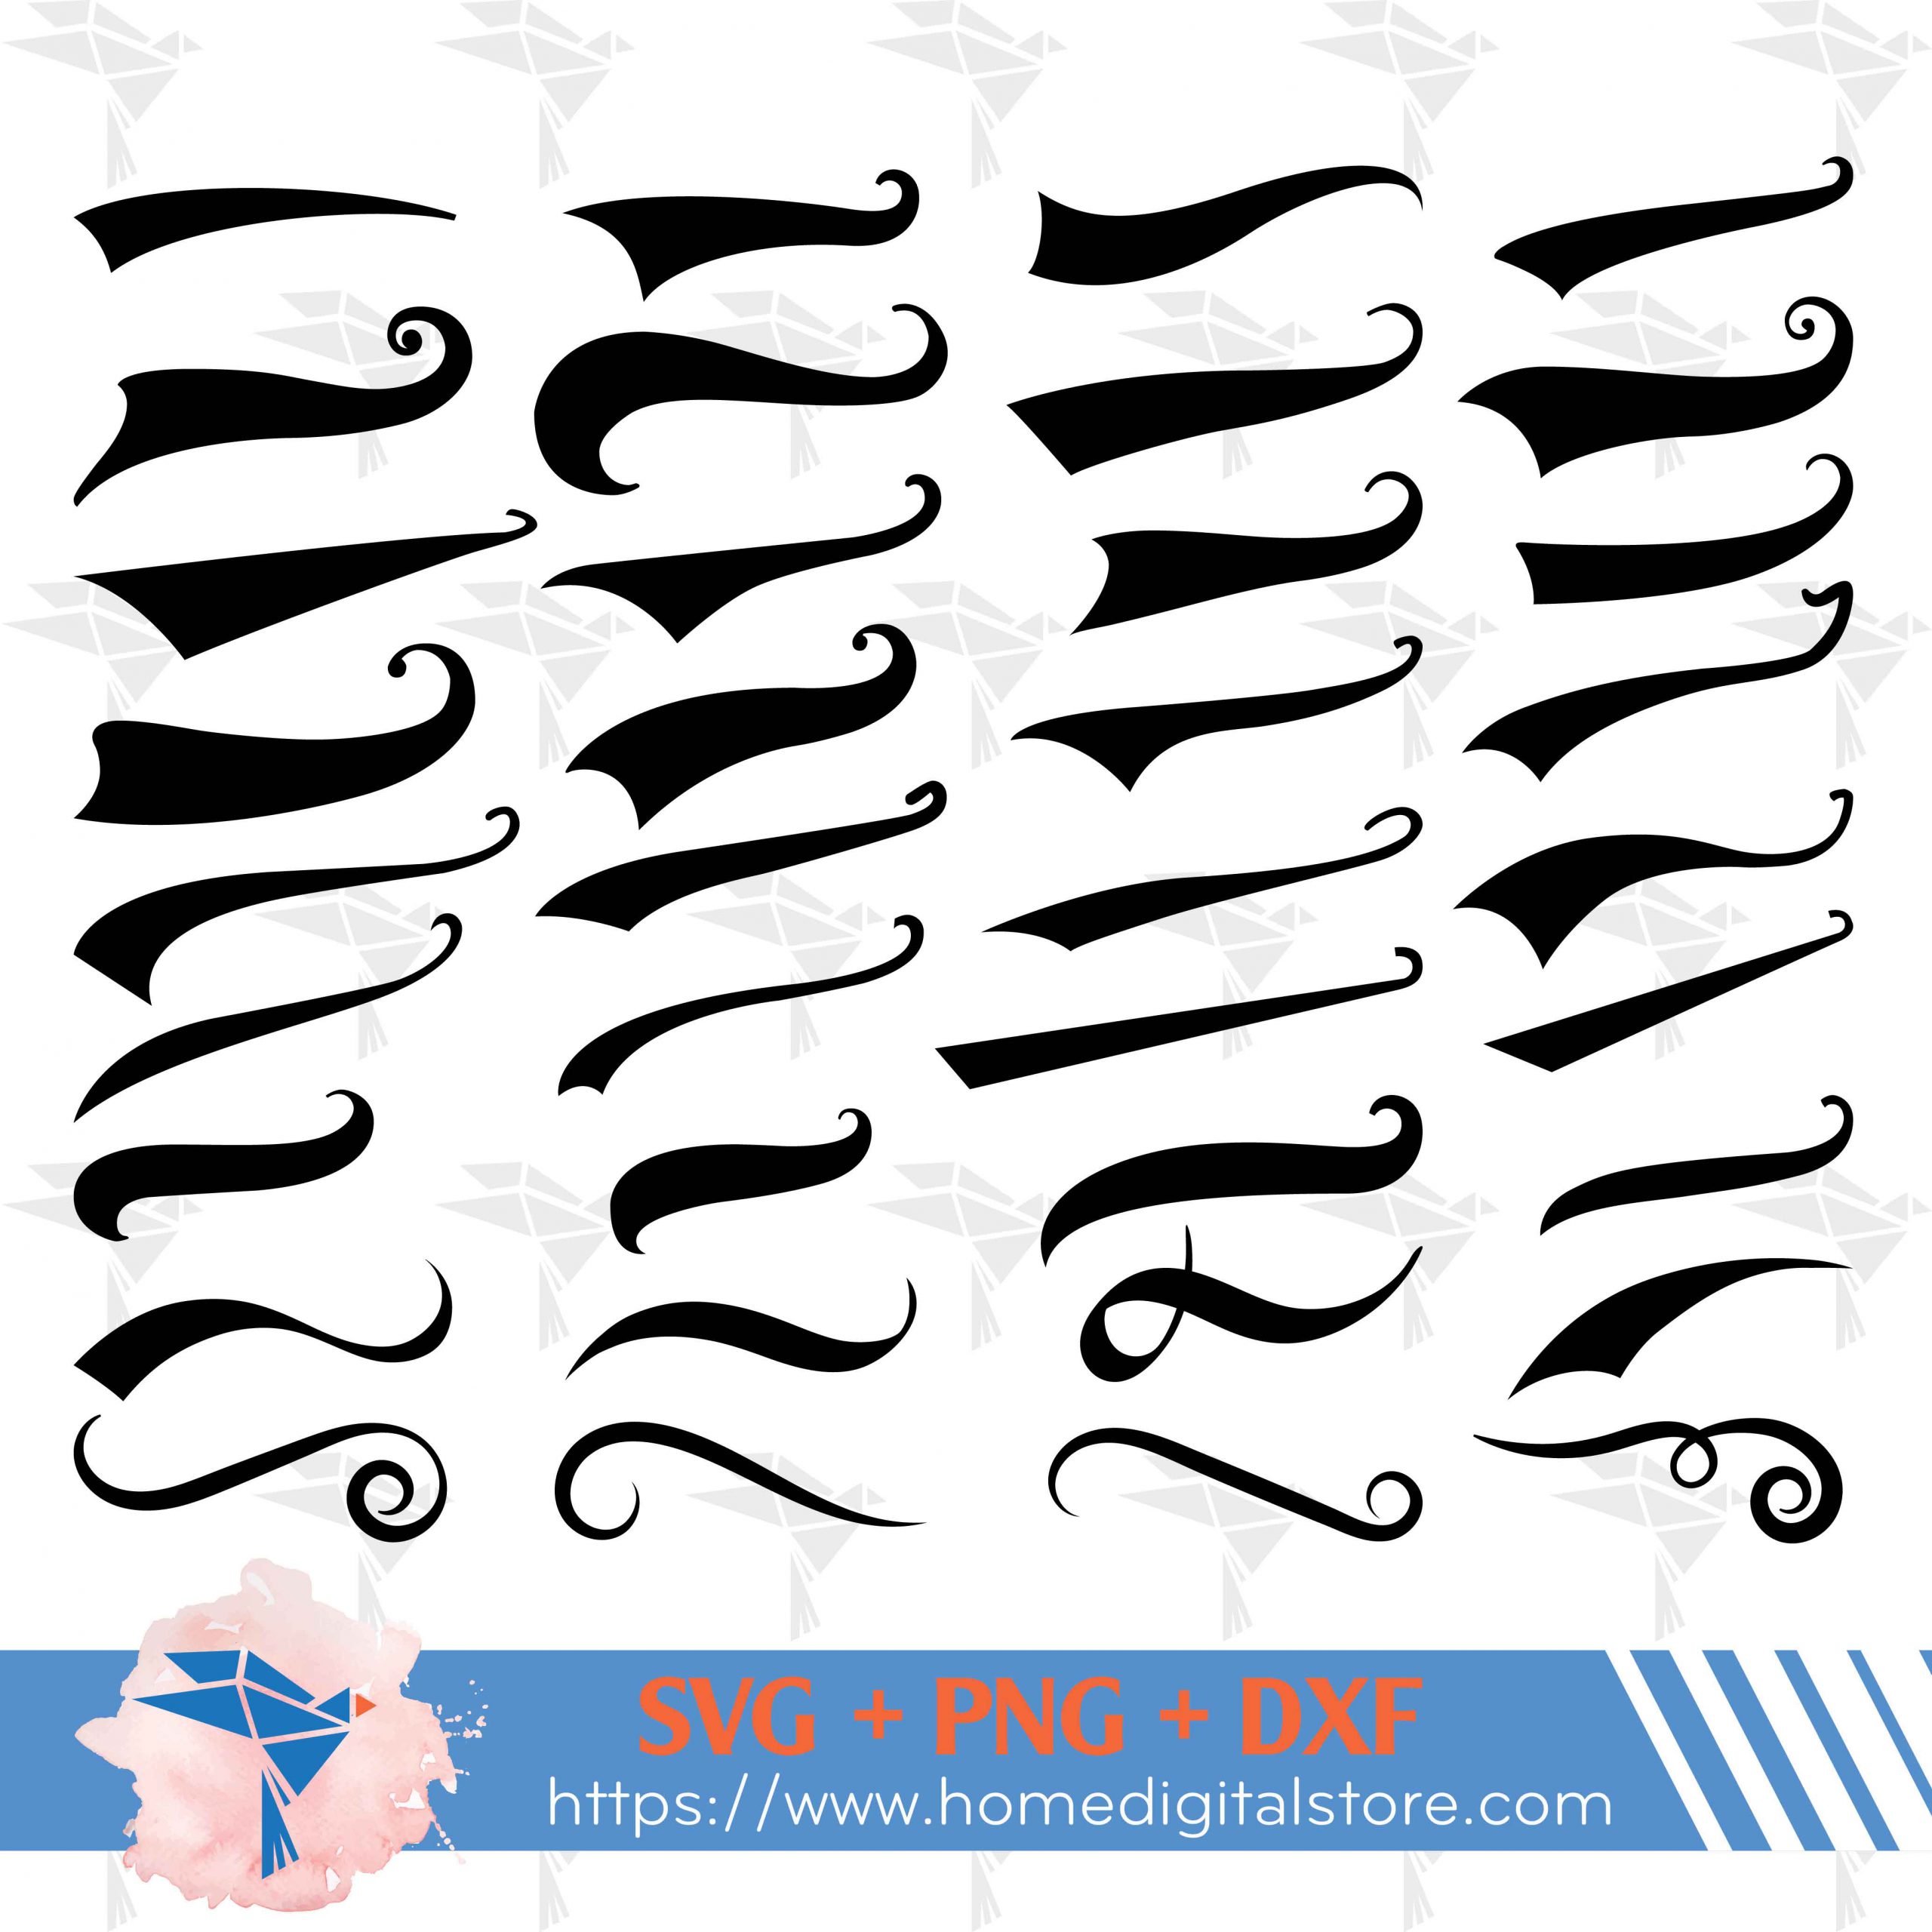 Swoosh SVG, PNG, DXF. Instant download files for Cricut Design Space,  Silhouette, Cutting, Printing, or more